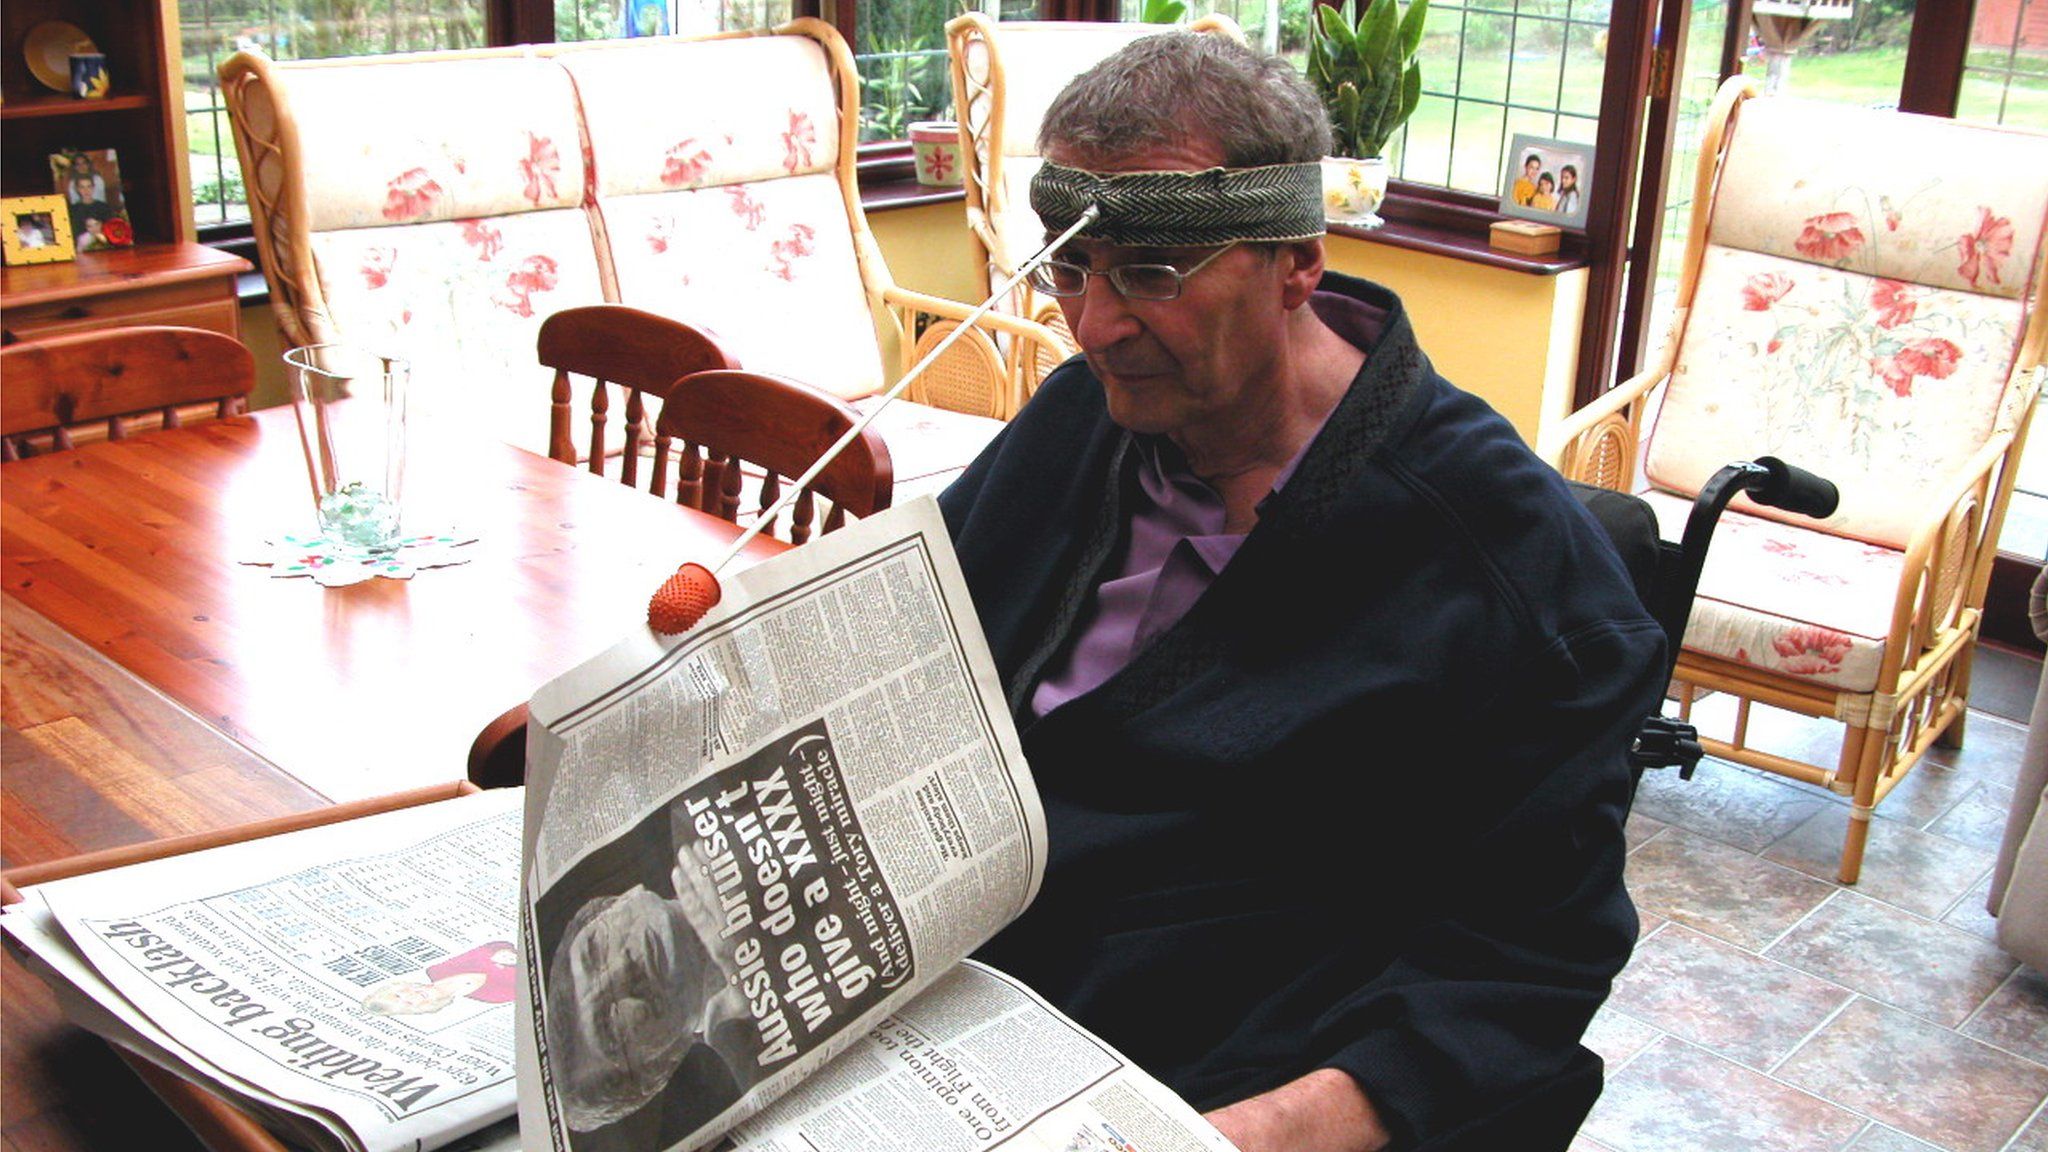 A man turns the page of a newspaper using a modified head-stick with a rubber attachment to grab the paper.